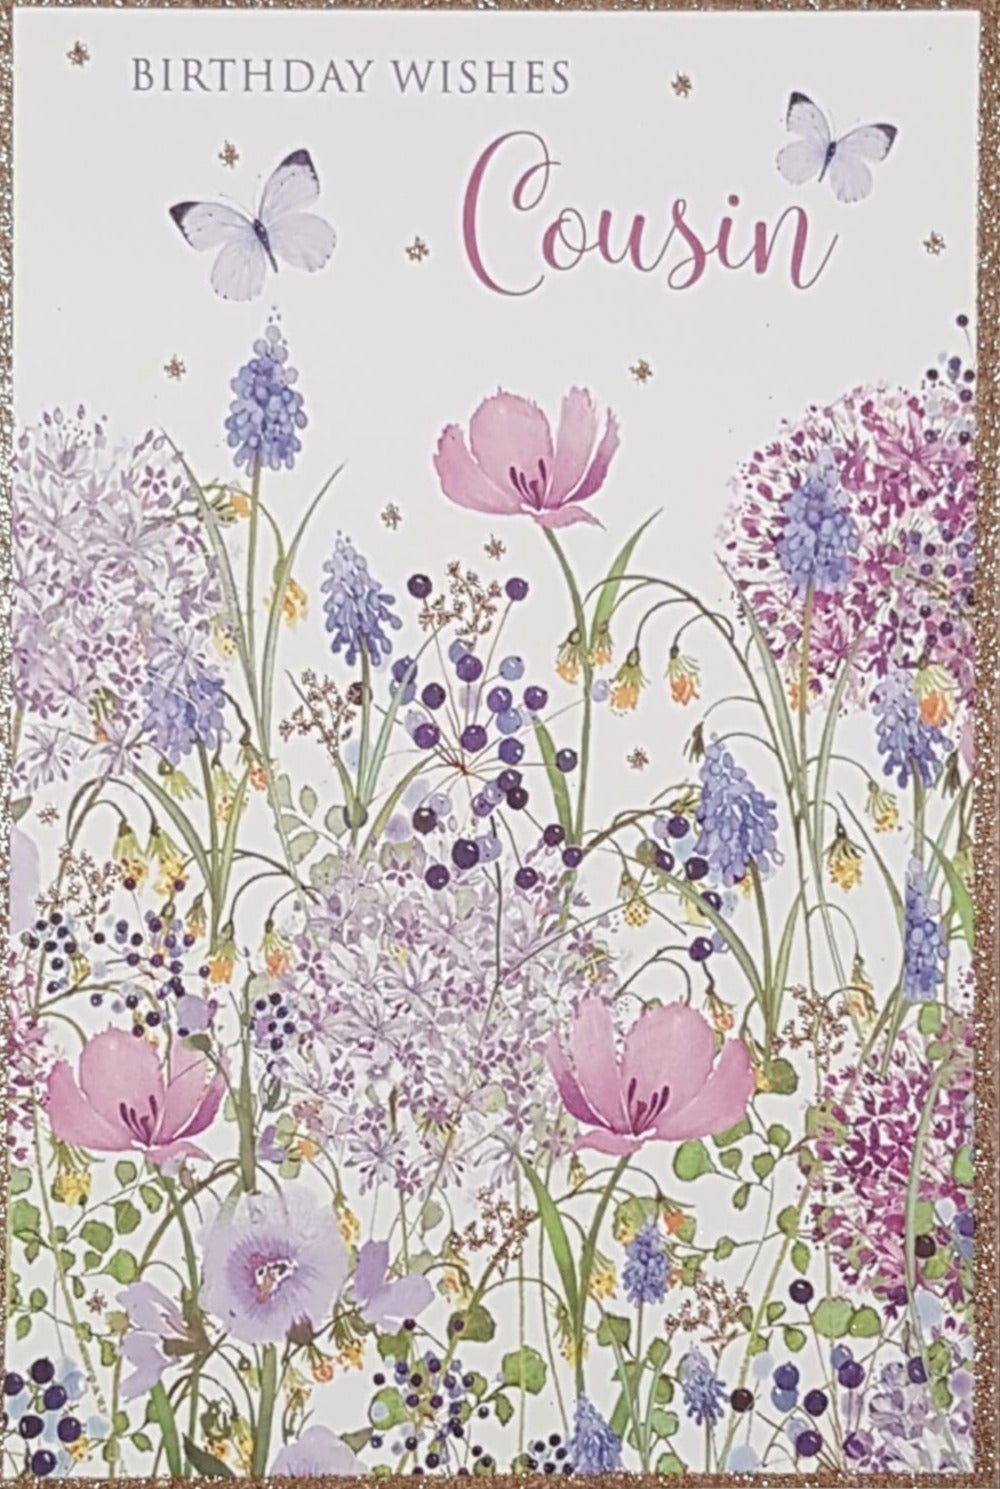 Birthday Card - Cousin / A Garden Of Flowers & A Shiny Gold Frame